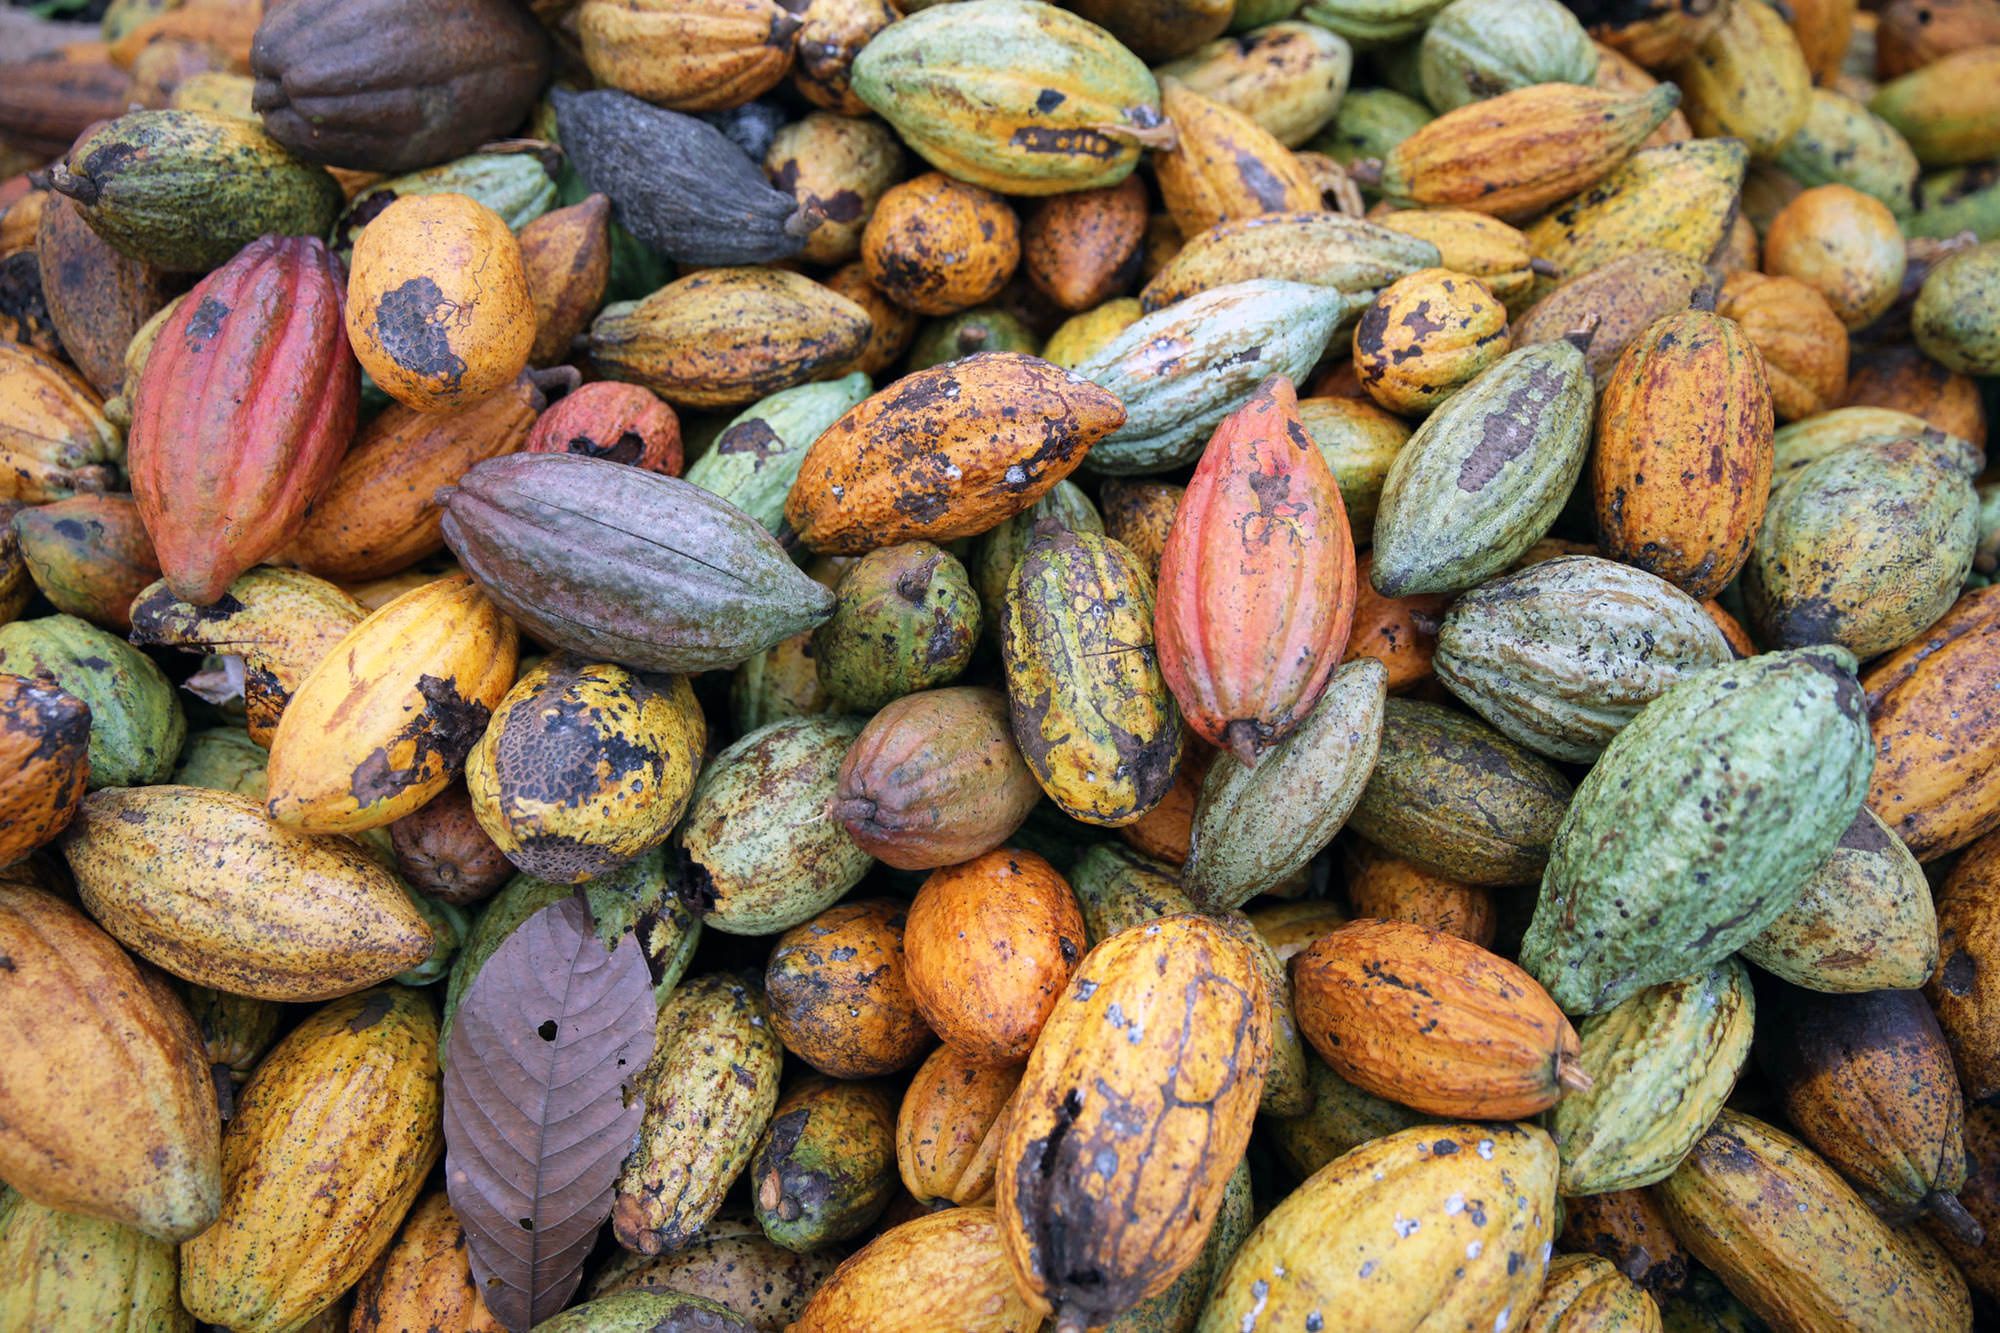 business plan for cocoa farming in ghana